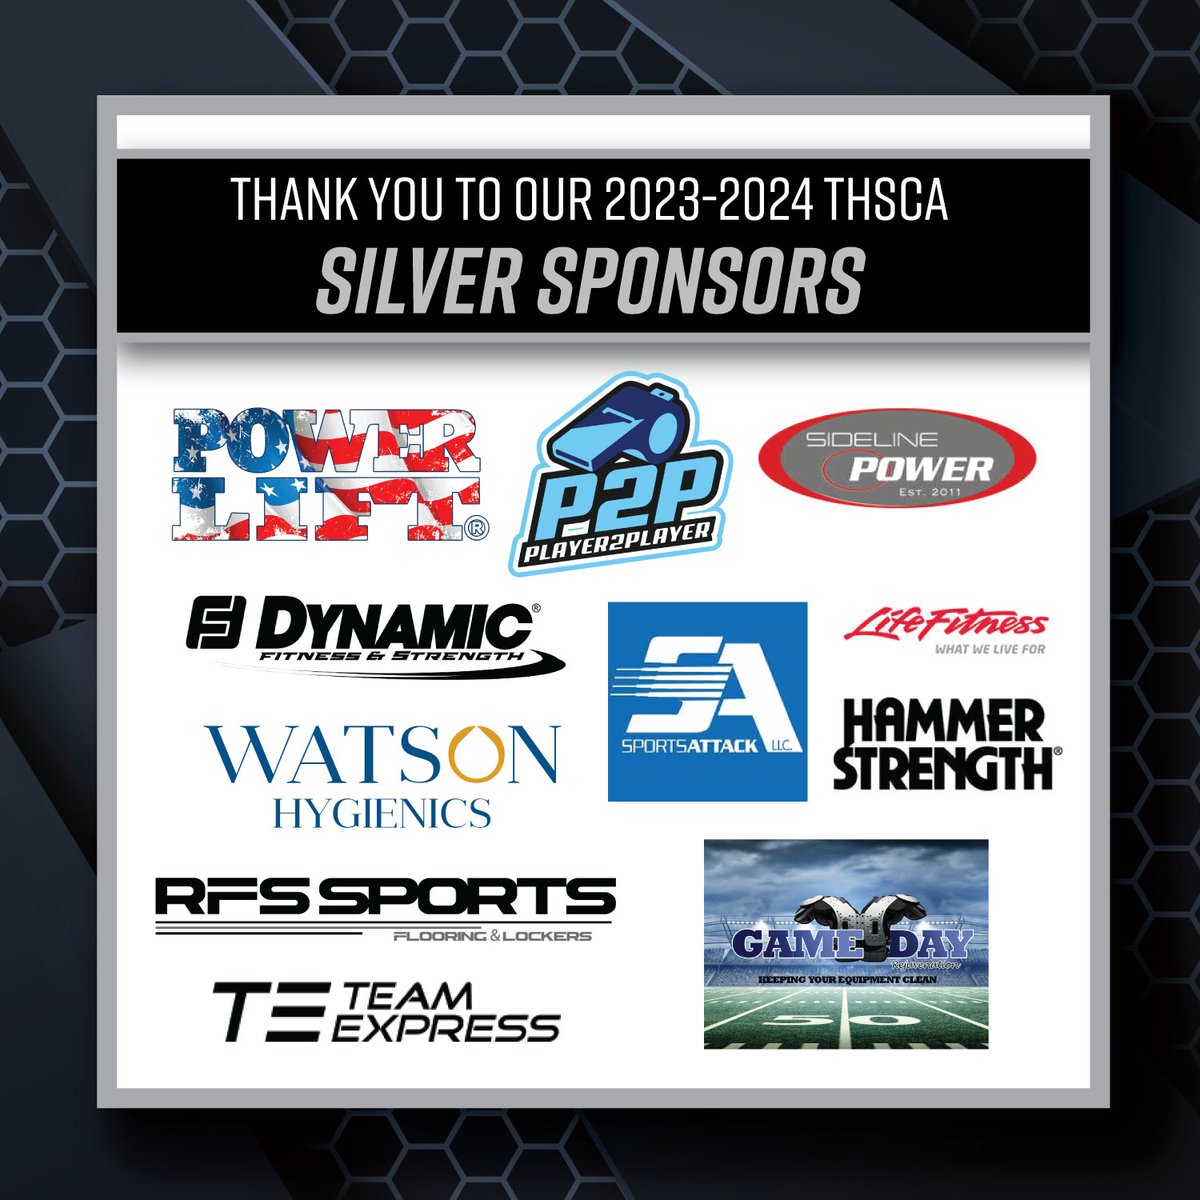 👏Three Cheers for our 23-24 THSCA Silver Sponsors!👏 Thank you for supporting our Texas coaches! #THSCAstrong @powerlift_tx @myplayer2player @SidelinePower @DynamicFandS @Sports_Attack @HammerStrength @RFS_Sports @Team_Express thsca.com/sponsors